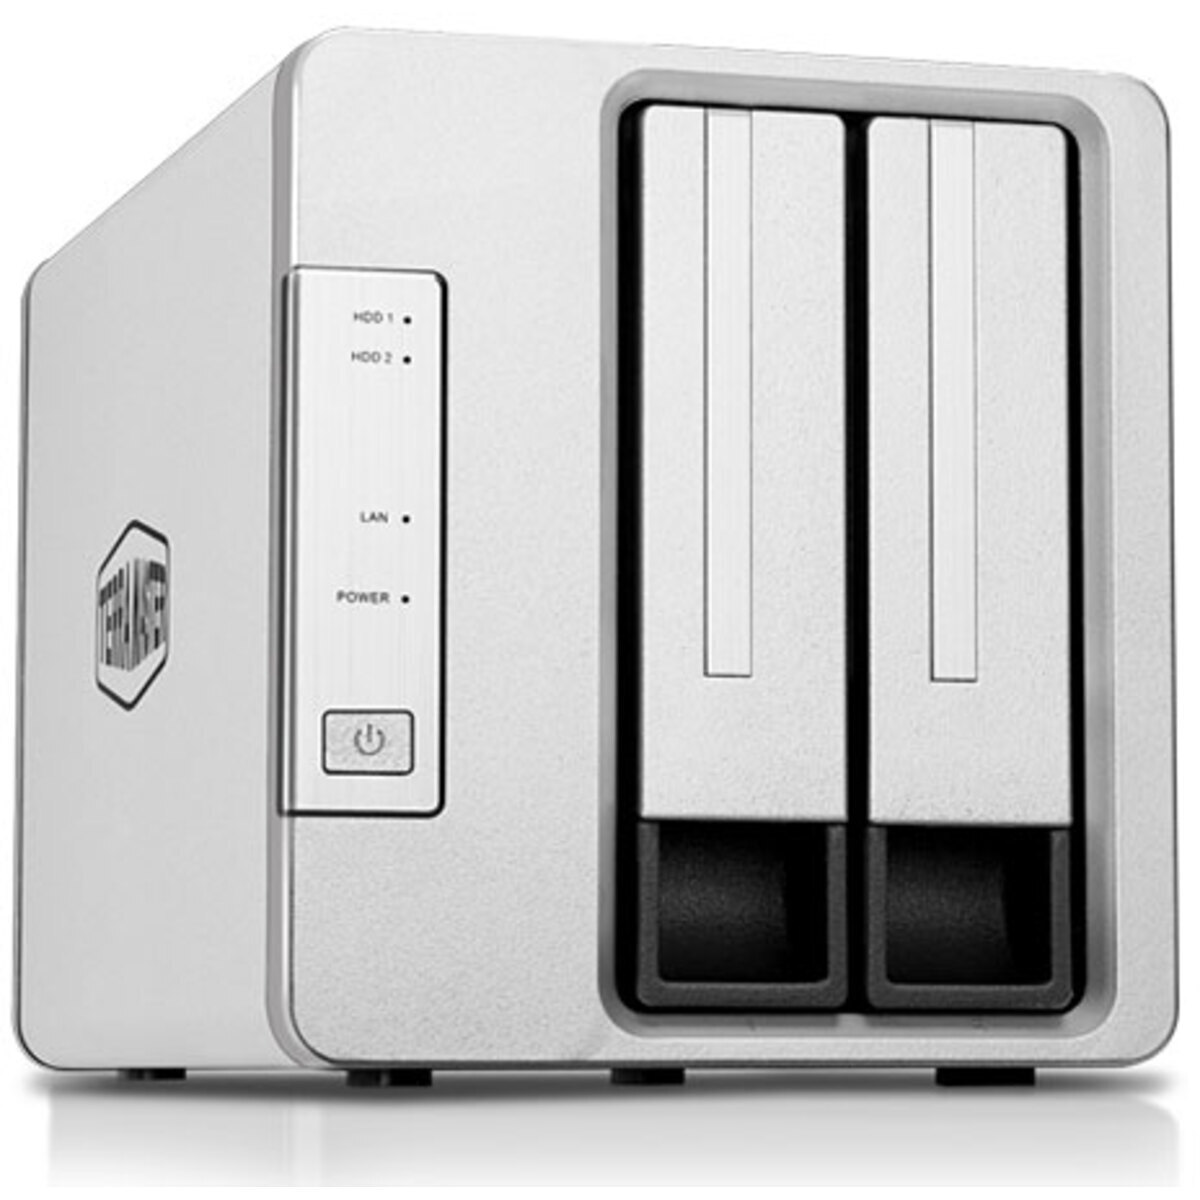 TerraMaster F2-223 14tb 2-Bay Desktop Personal / Basic Home / Small Office NAS - Network Attached Storage Device 1x14tb Seagate IronWolf Pro ST14000NT001 3.5 7200rpm SATA 6Gb/s HDD NAS Class Drives Installed - Burn-In Tested - FREE RAM UPGRADE F2-223